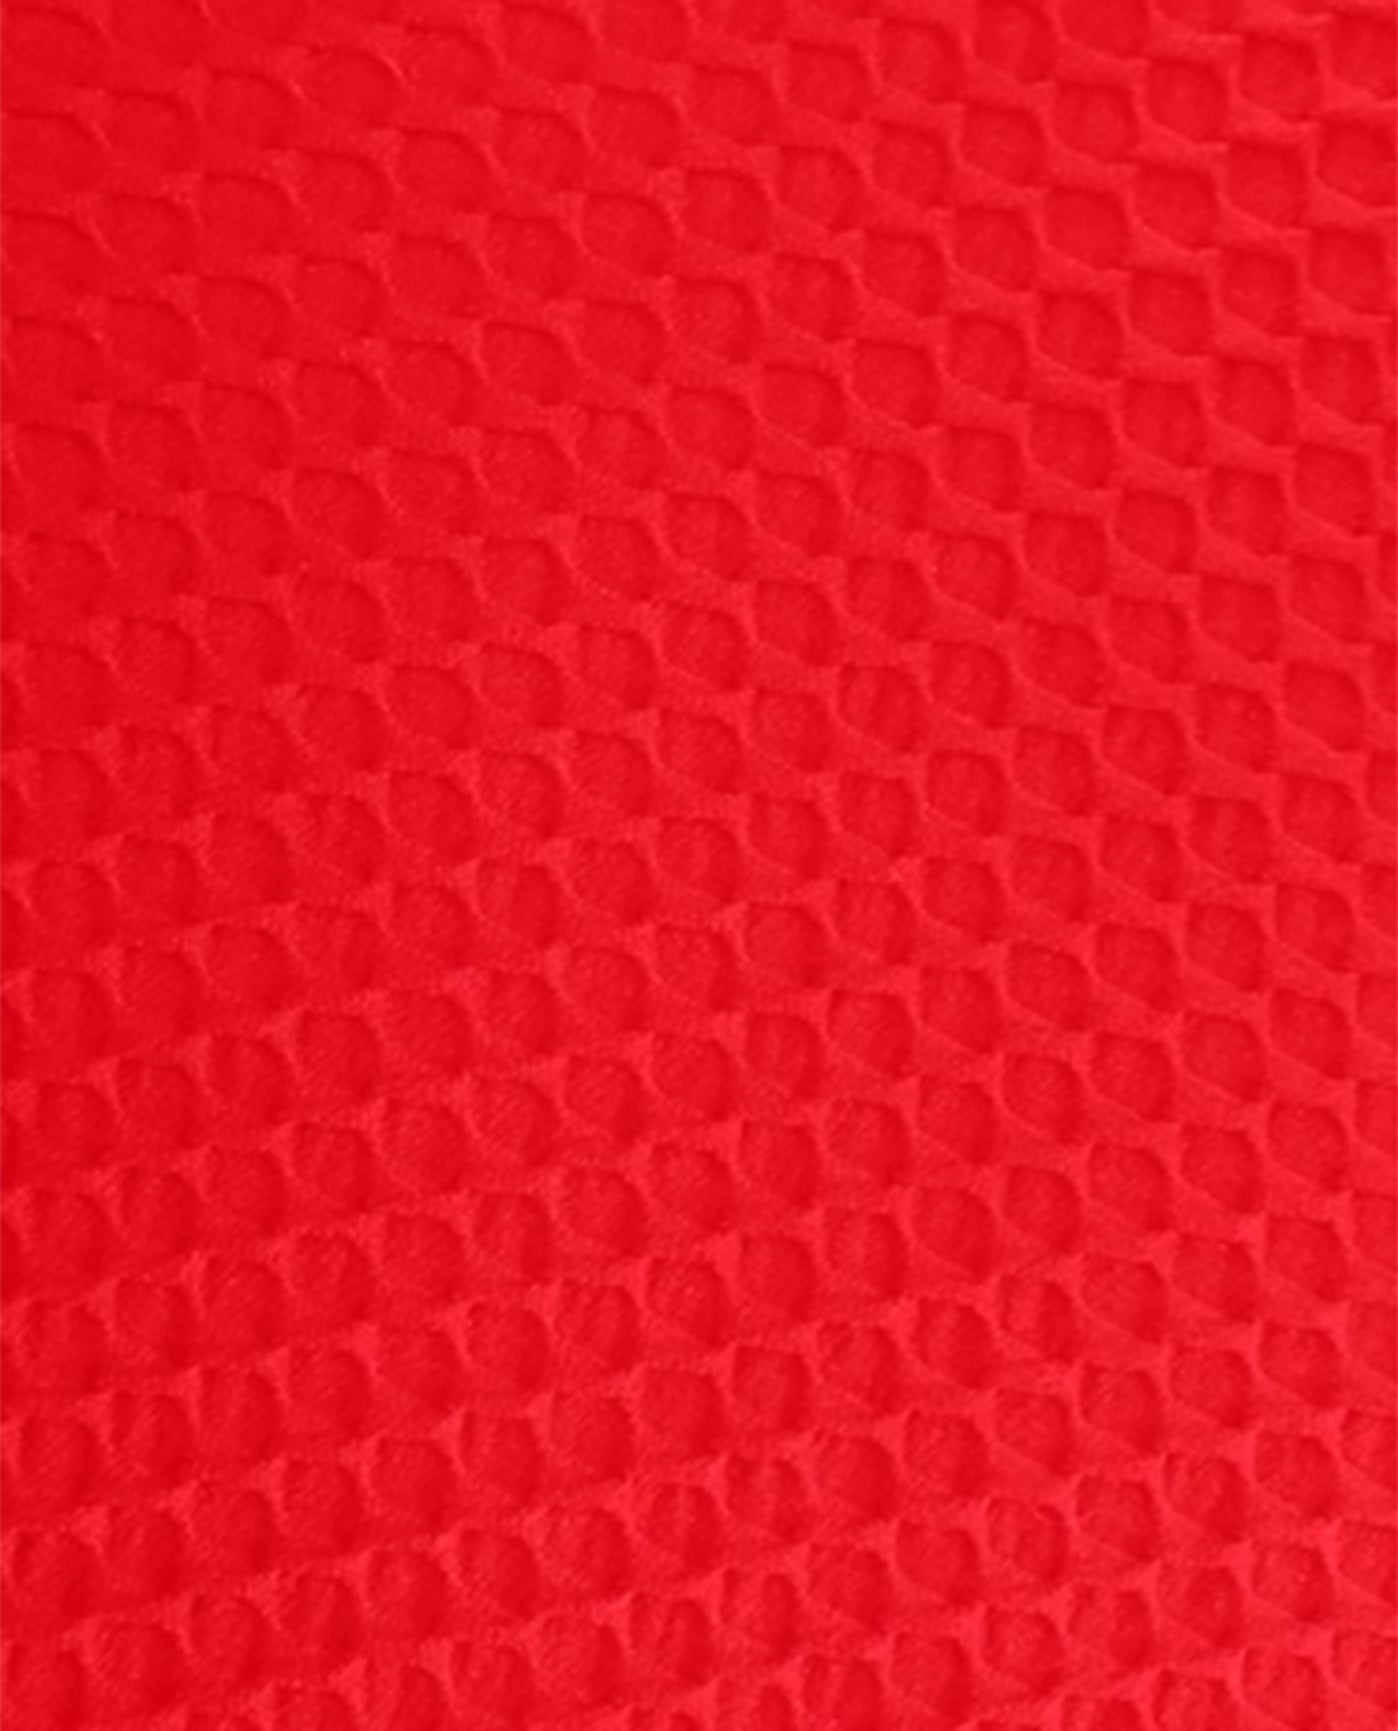 FABRIC SWATCH VIEW OF CHLORINE RESISTANT AQUAMORE COLOR BLOCK TEXTURED SPORTY ONE PIECE SWIMSUIT | 616 AQT TEXTURED SCARLET